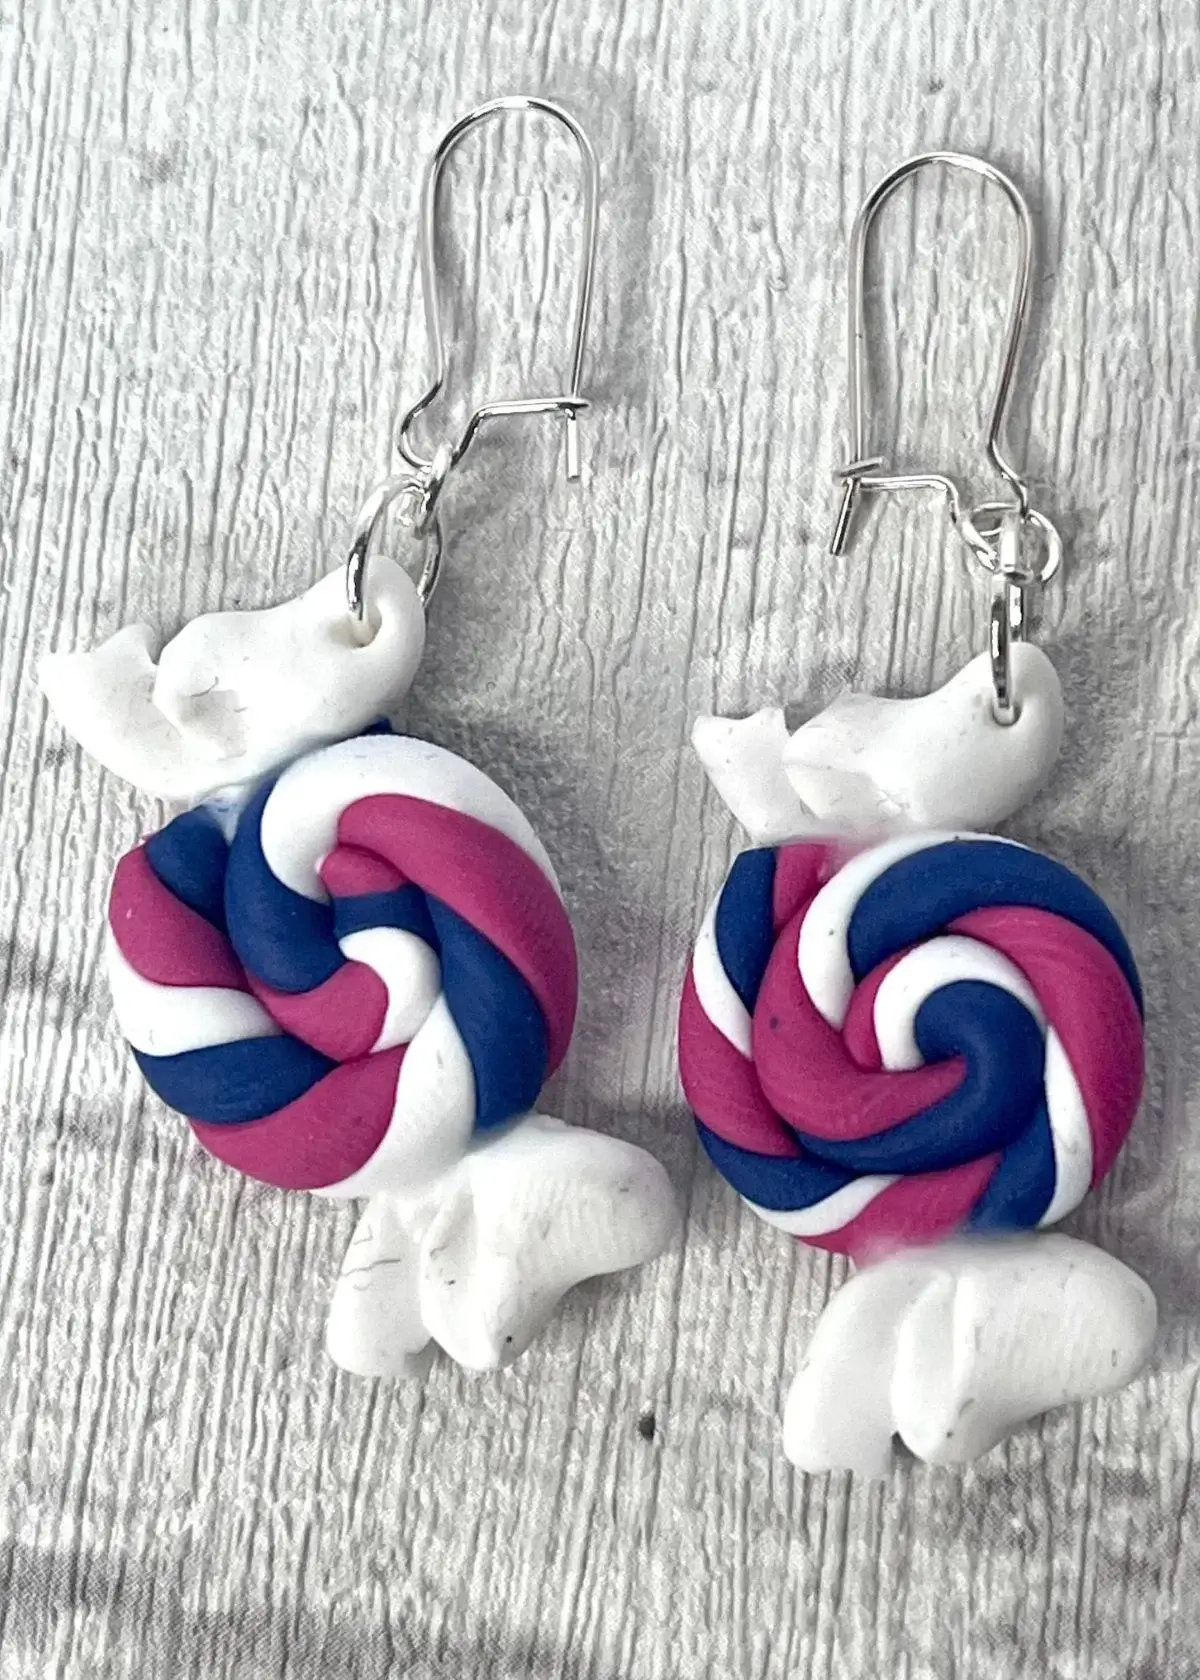 What Materials Are Used in Candy Earrings?